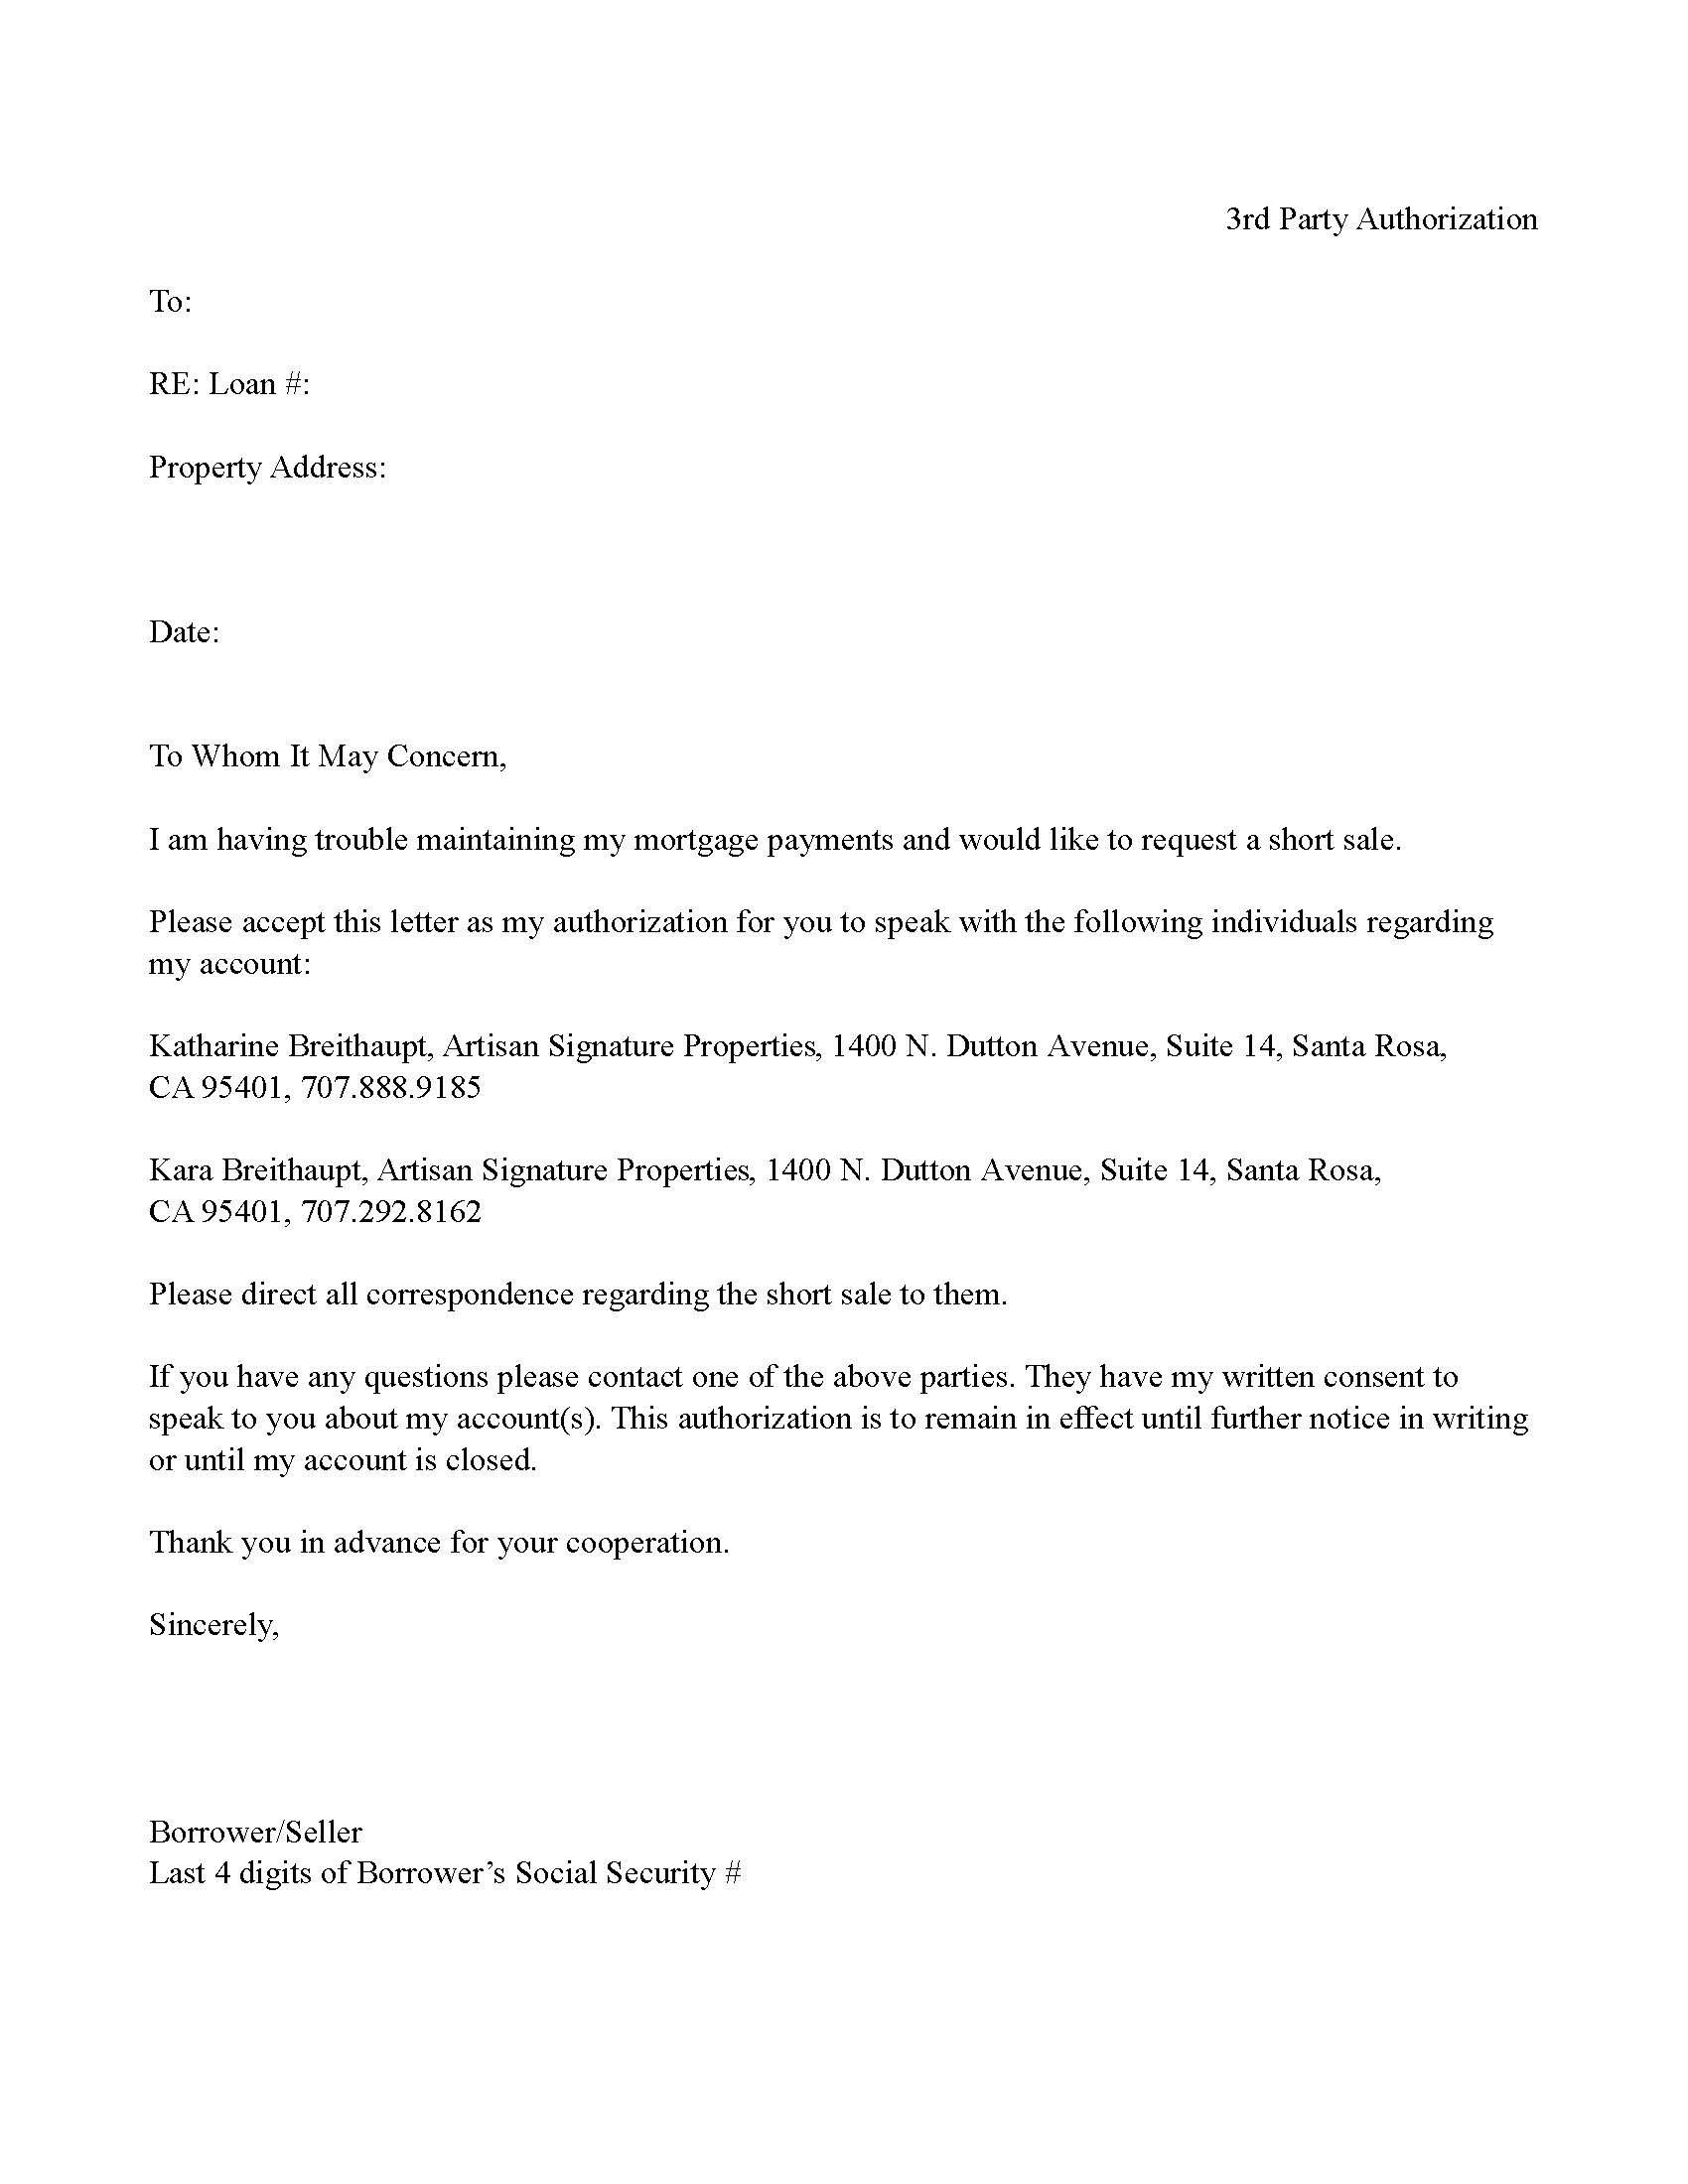 Short Sale Hardship Letter Template - How to Write A Short Sale Hardship Letter Choice Image Letter